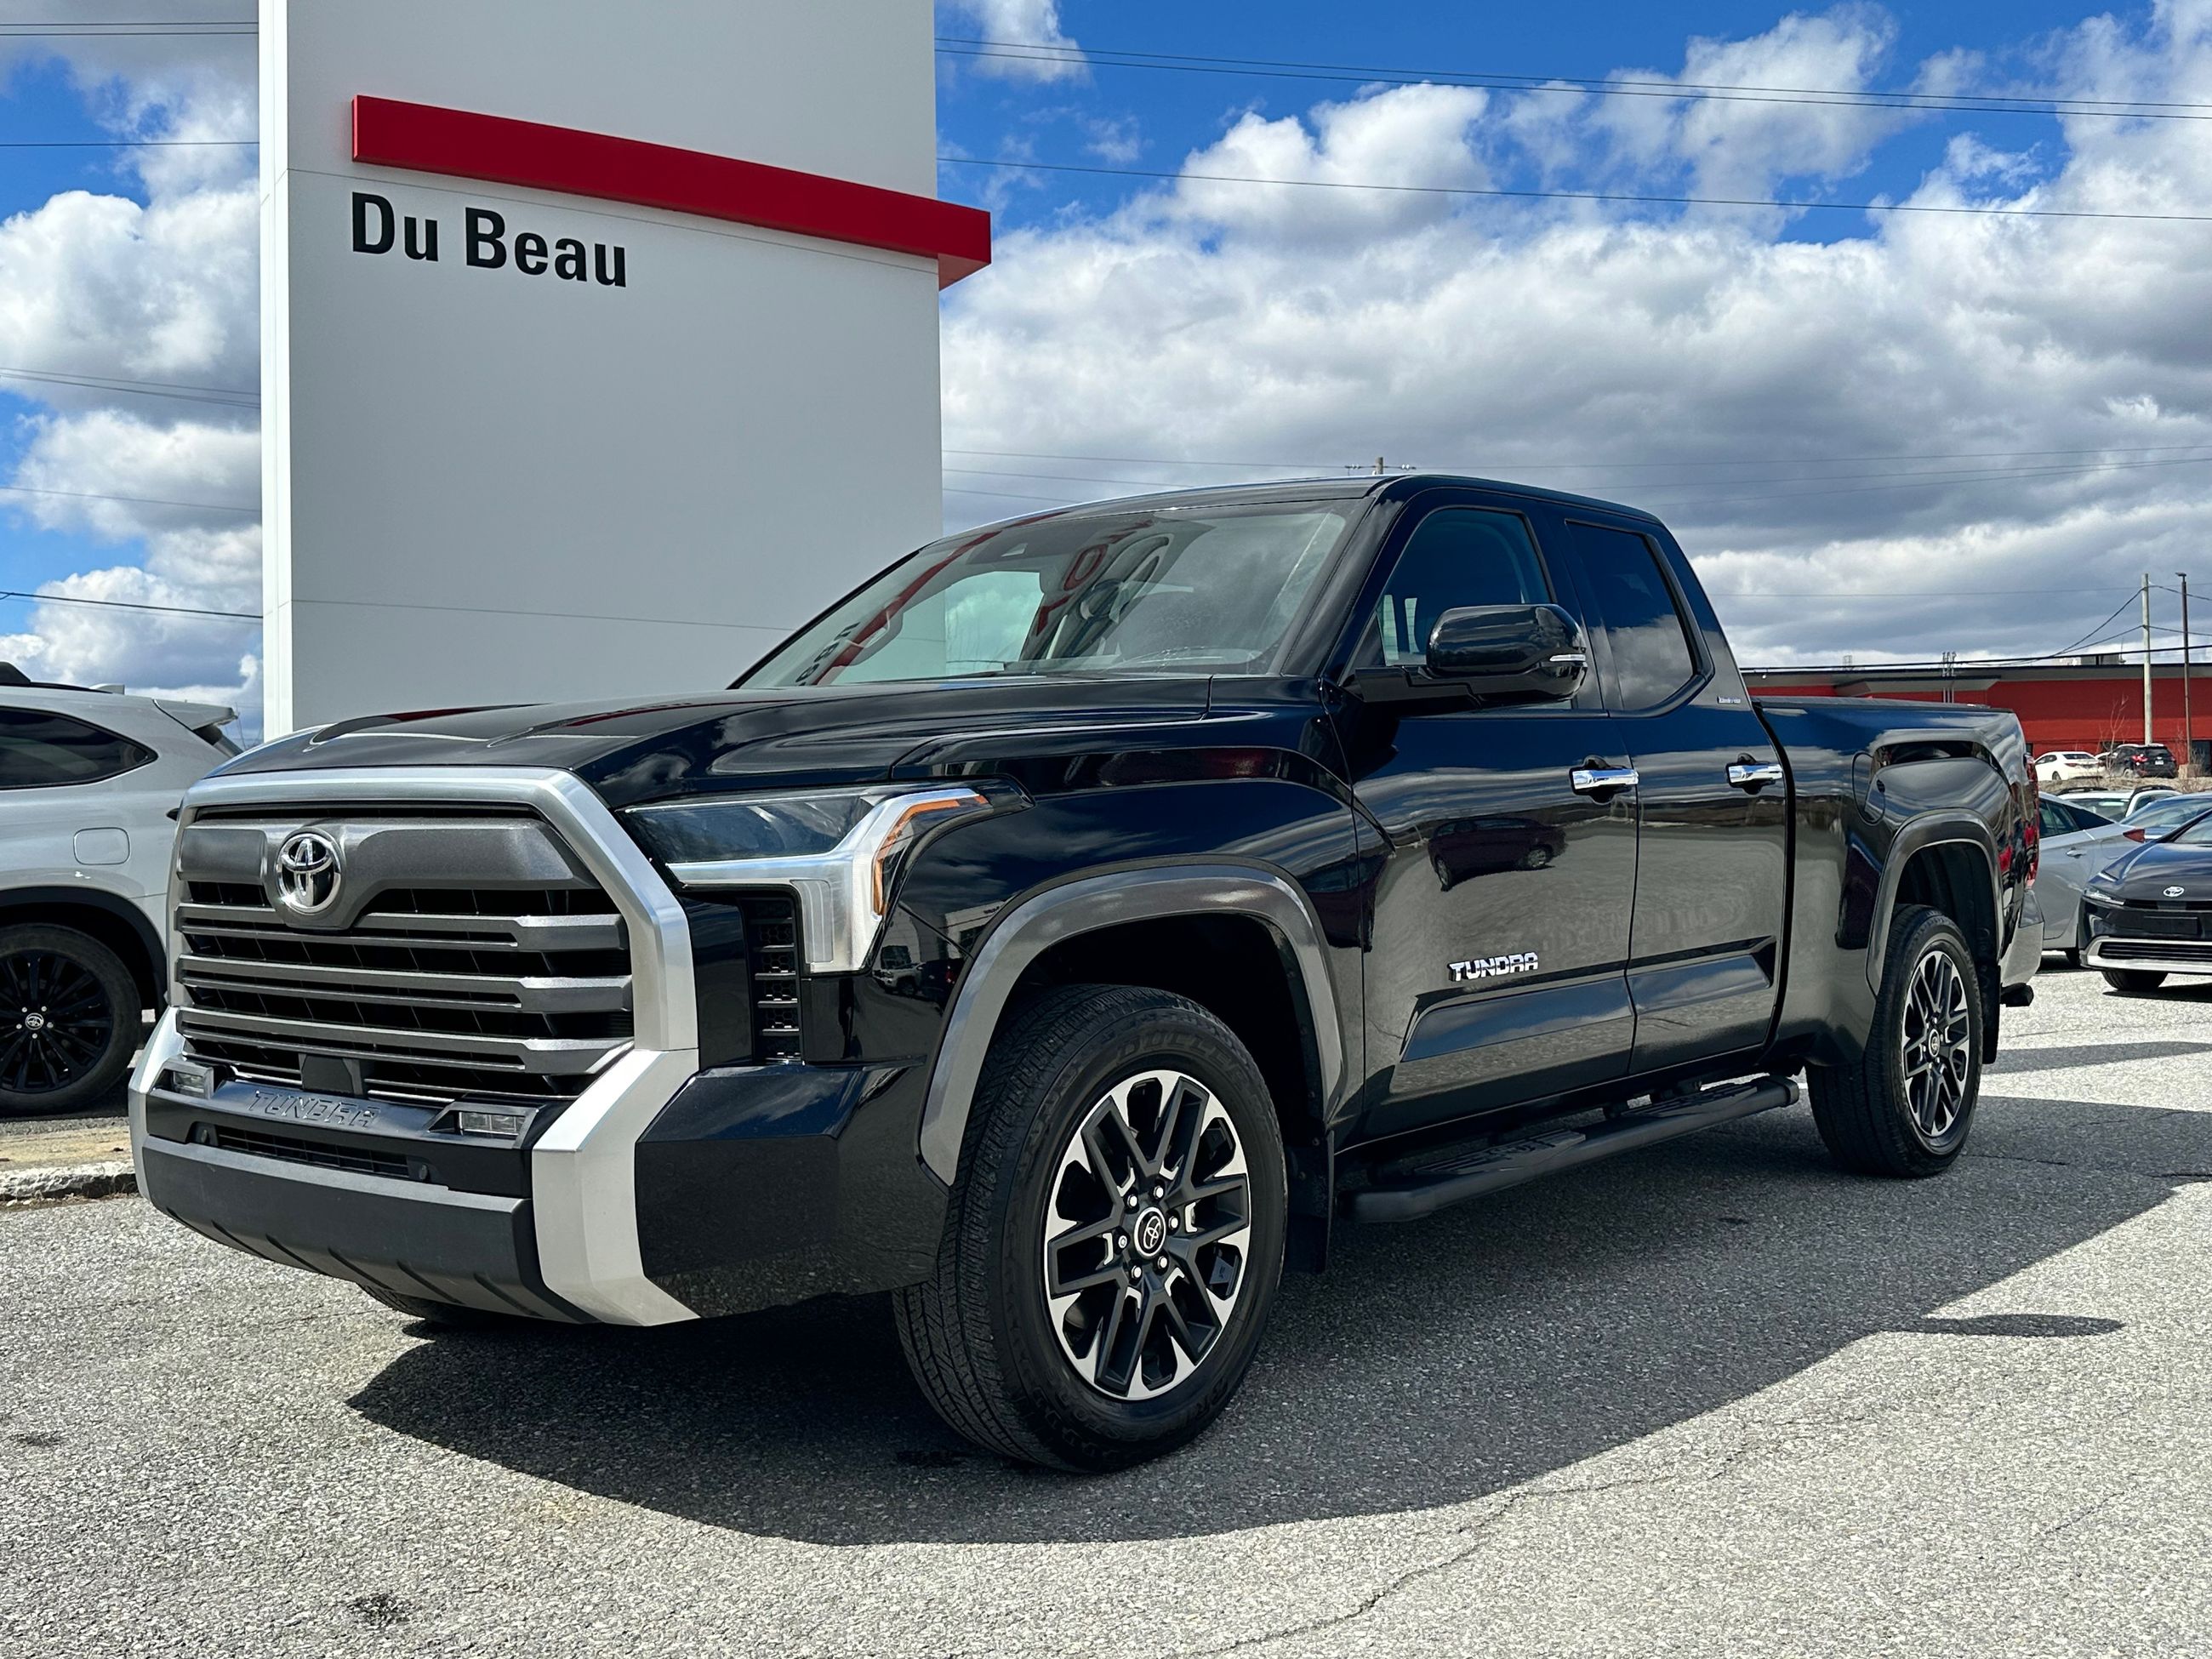 Du Beau Toyota | Toyota Tundra Pre-owned Inventory in Thetford Mines